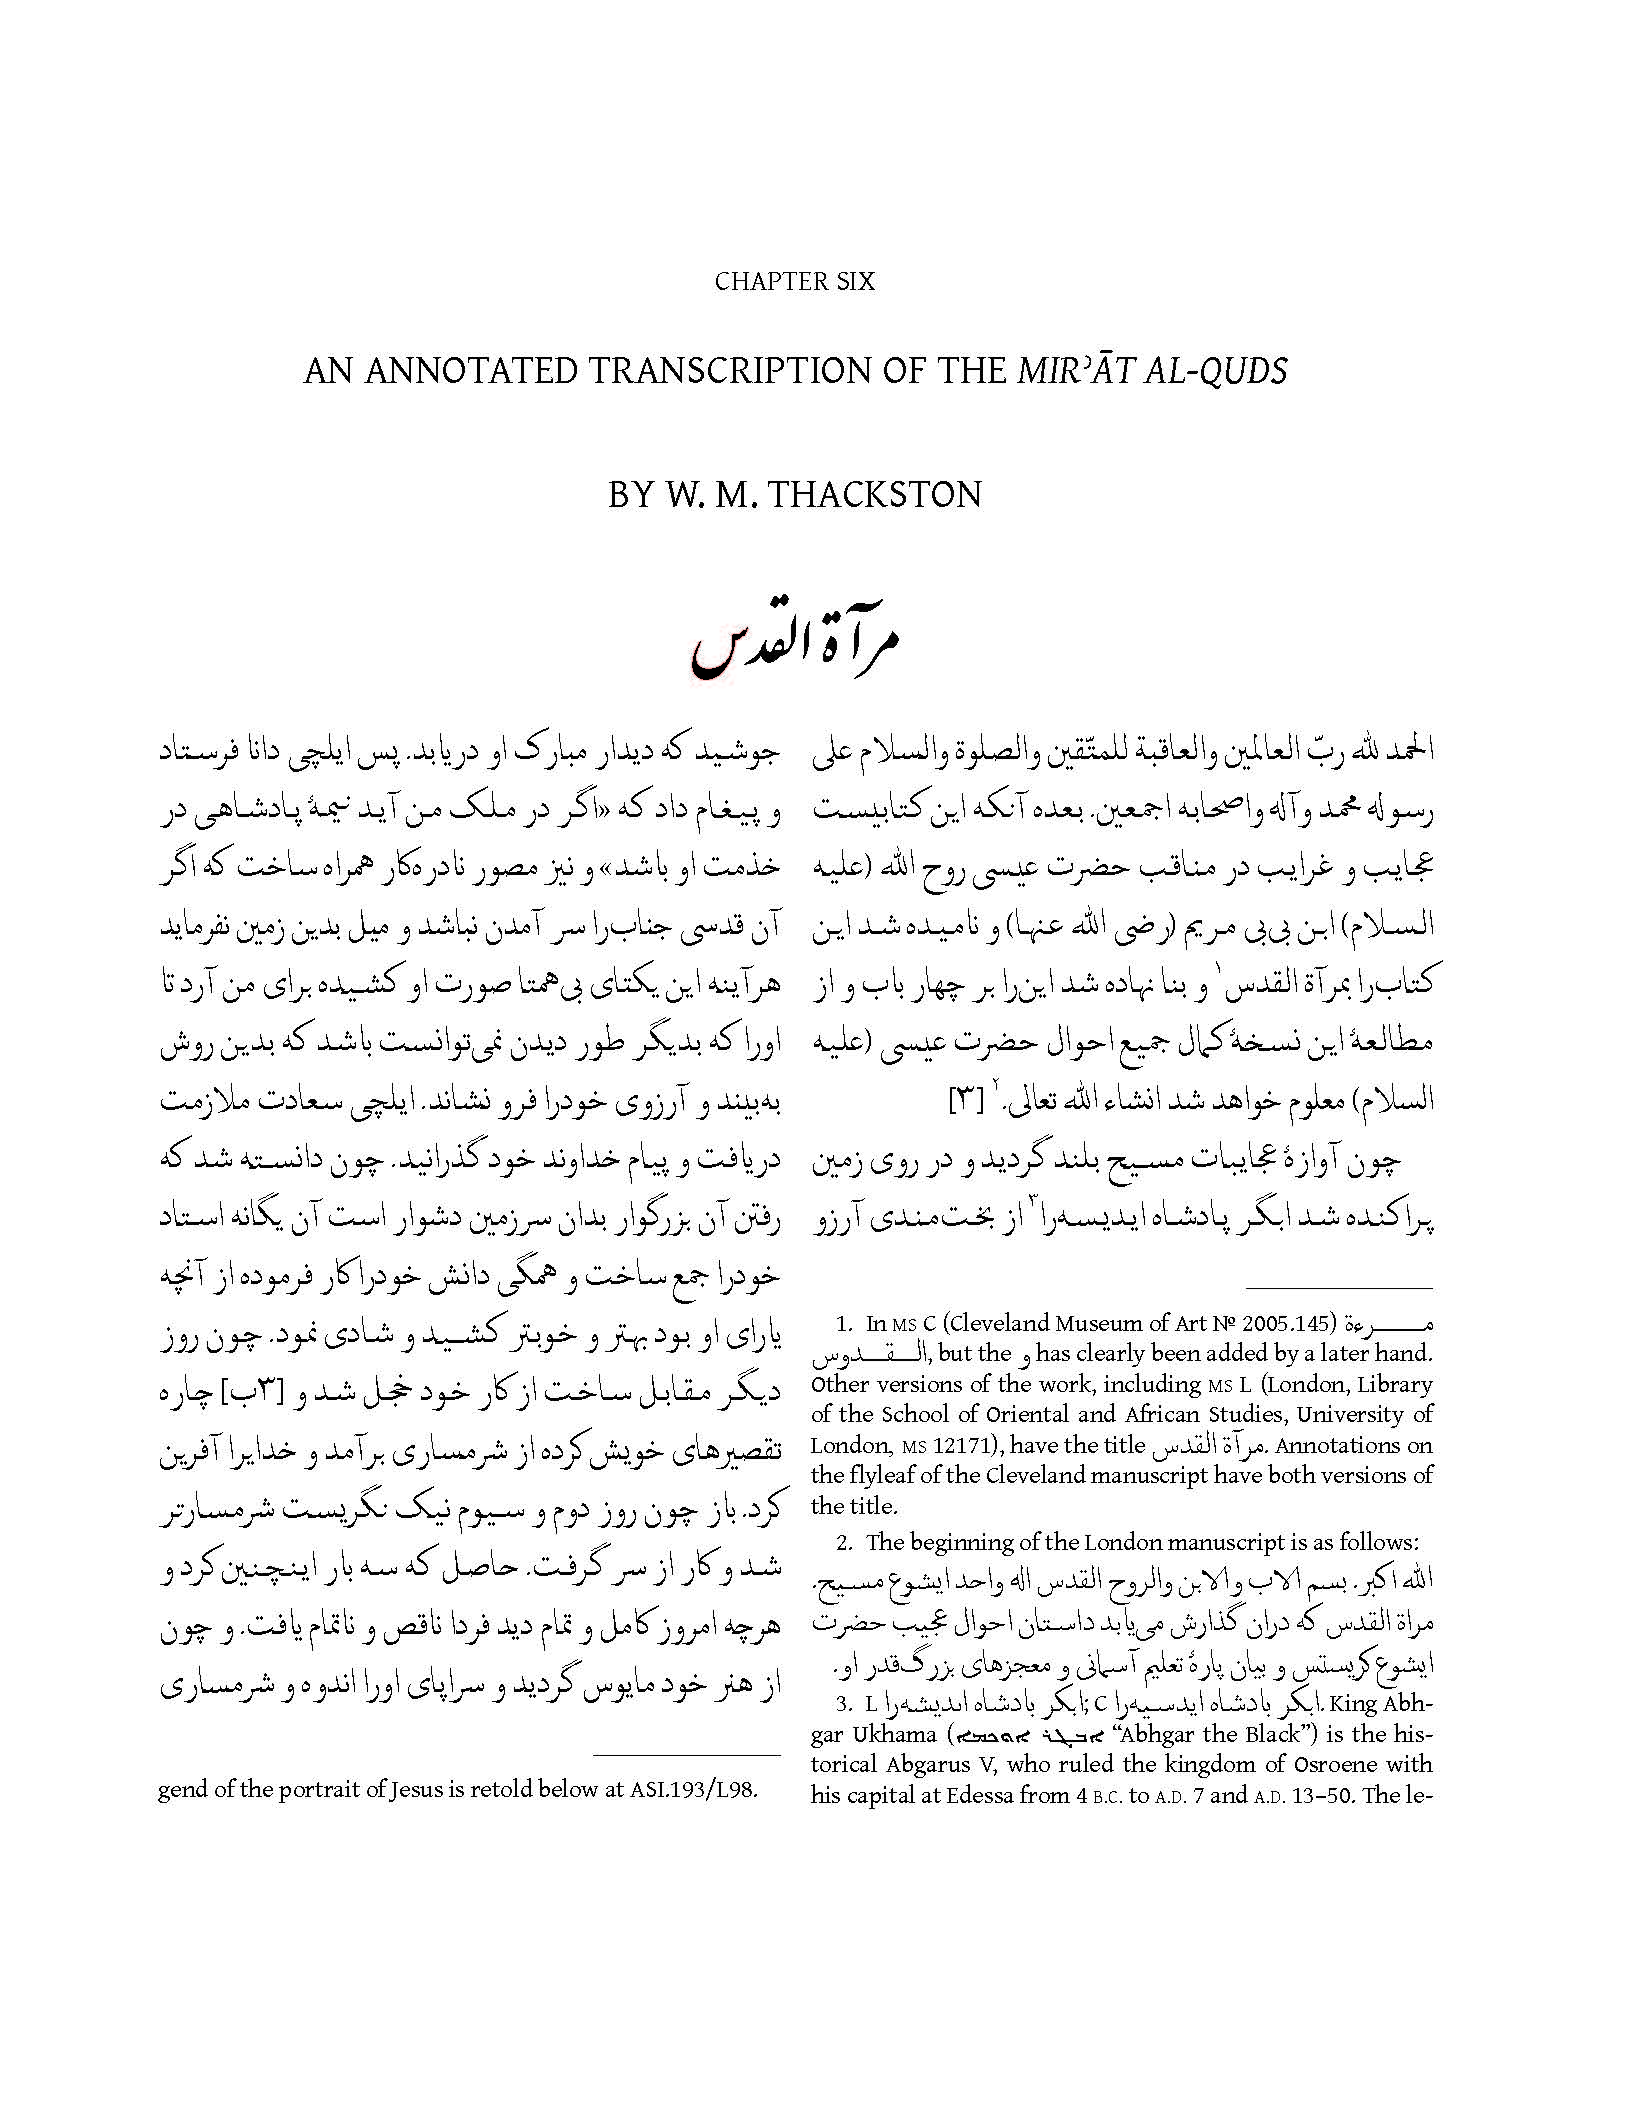 Jerónimo Xavier - Chapter Six of&nbsp;<span style="font-style: italic;">Mir’āt al-quds (Mirror of Holiness): A Life of Christ for Emperor Akbar.&nbsp;</span>This study examines the&nbsp;<span style="font-style: italic;">Mir'at al-Quds (Mirror of Holiness)</span>, an account of the life of Christ written by a Jesuit missionary to the court of Mughal Emperor Akbar, who took an interest in Christianity. Three illustrated copies exist, the most important of which is in the Cleveland Museum of Art and forms the basis of this study. The text, originally in Persian, is translated to English for the first time by Wheeler M. Thackston. Chapter Six provides a transcription of the original Persian text annotated by Wheeler M. Thackston. This study is part of the series&nbsp;<span style="font-style: italic;">Studies and Sources on Islamic Art and Architecture: Supplements to Muqarnas</span>, Volume XII.